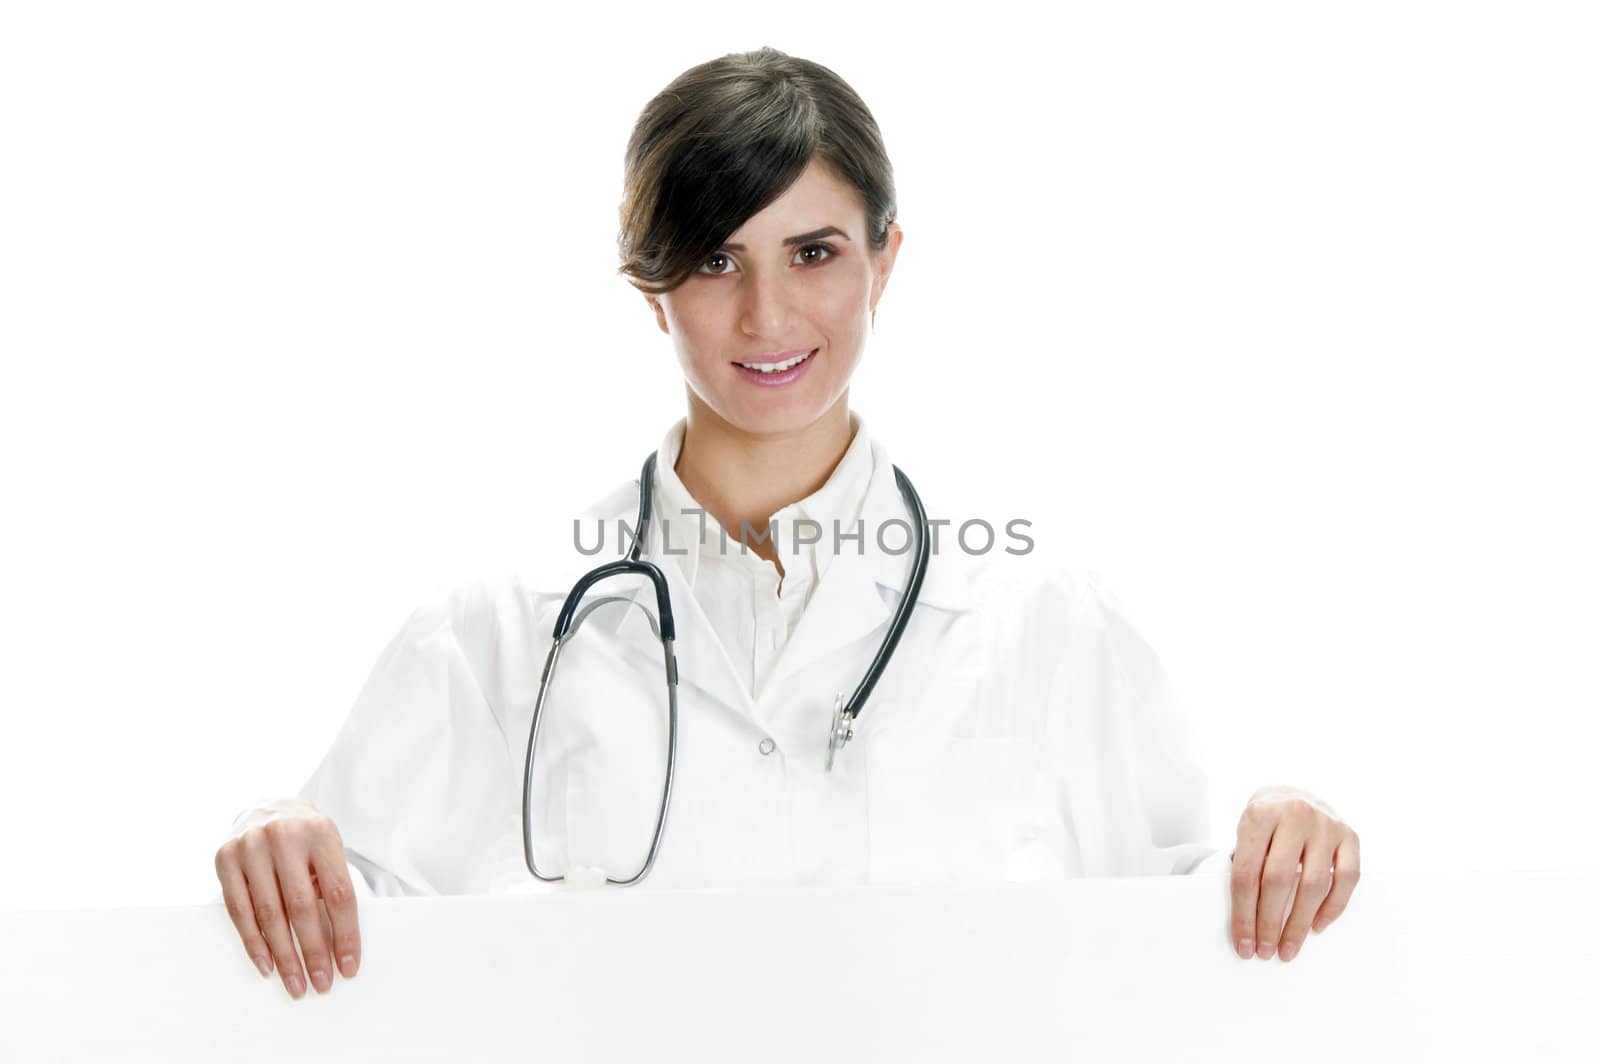 lady doctor standing with placard by imagerymajestic